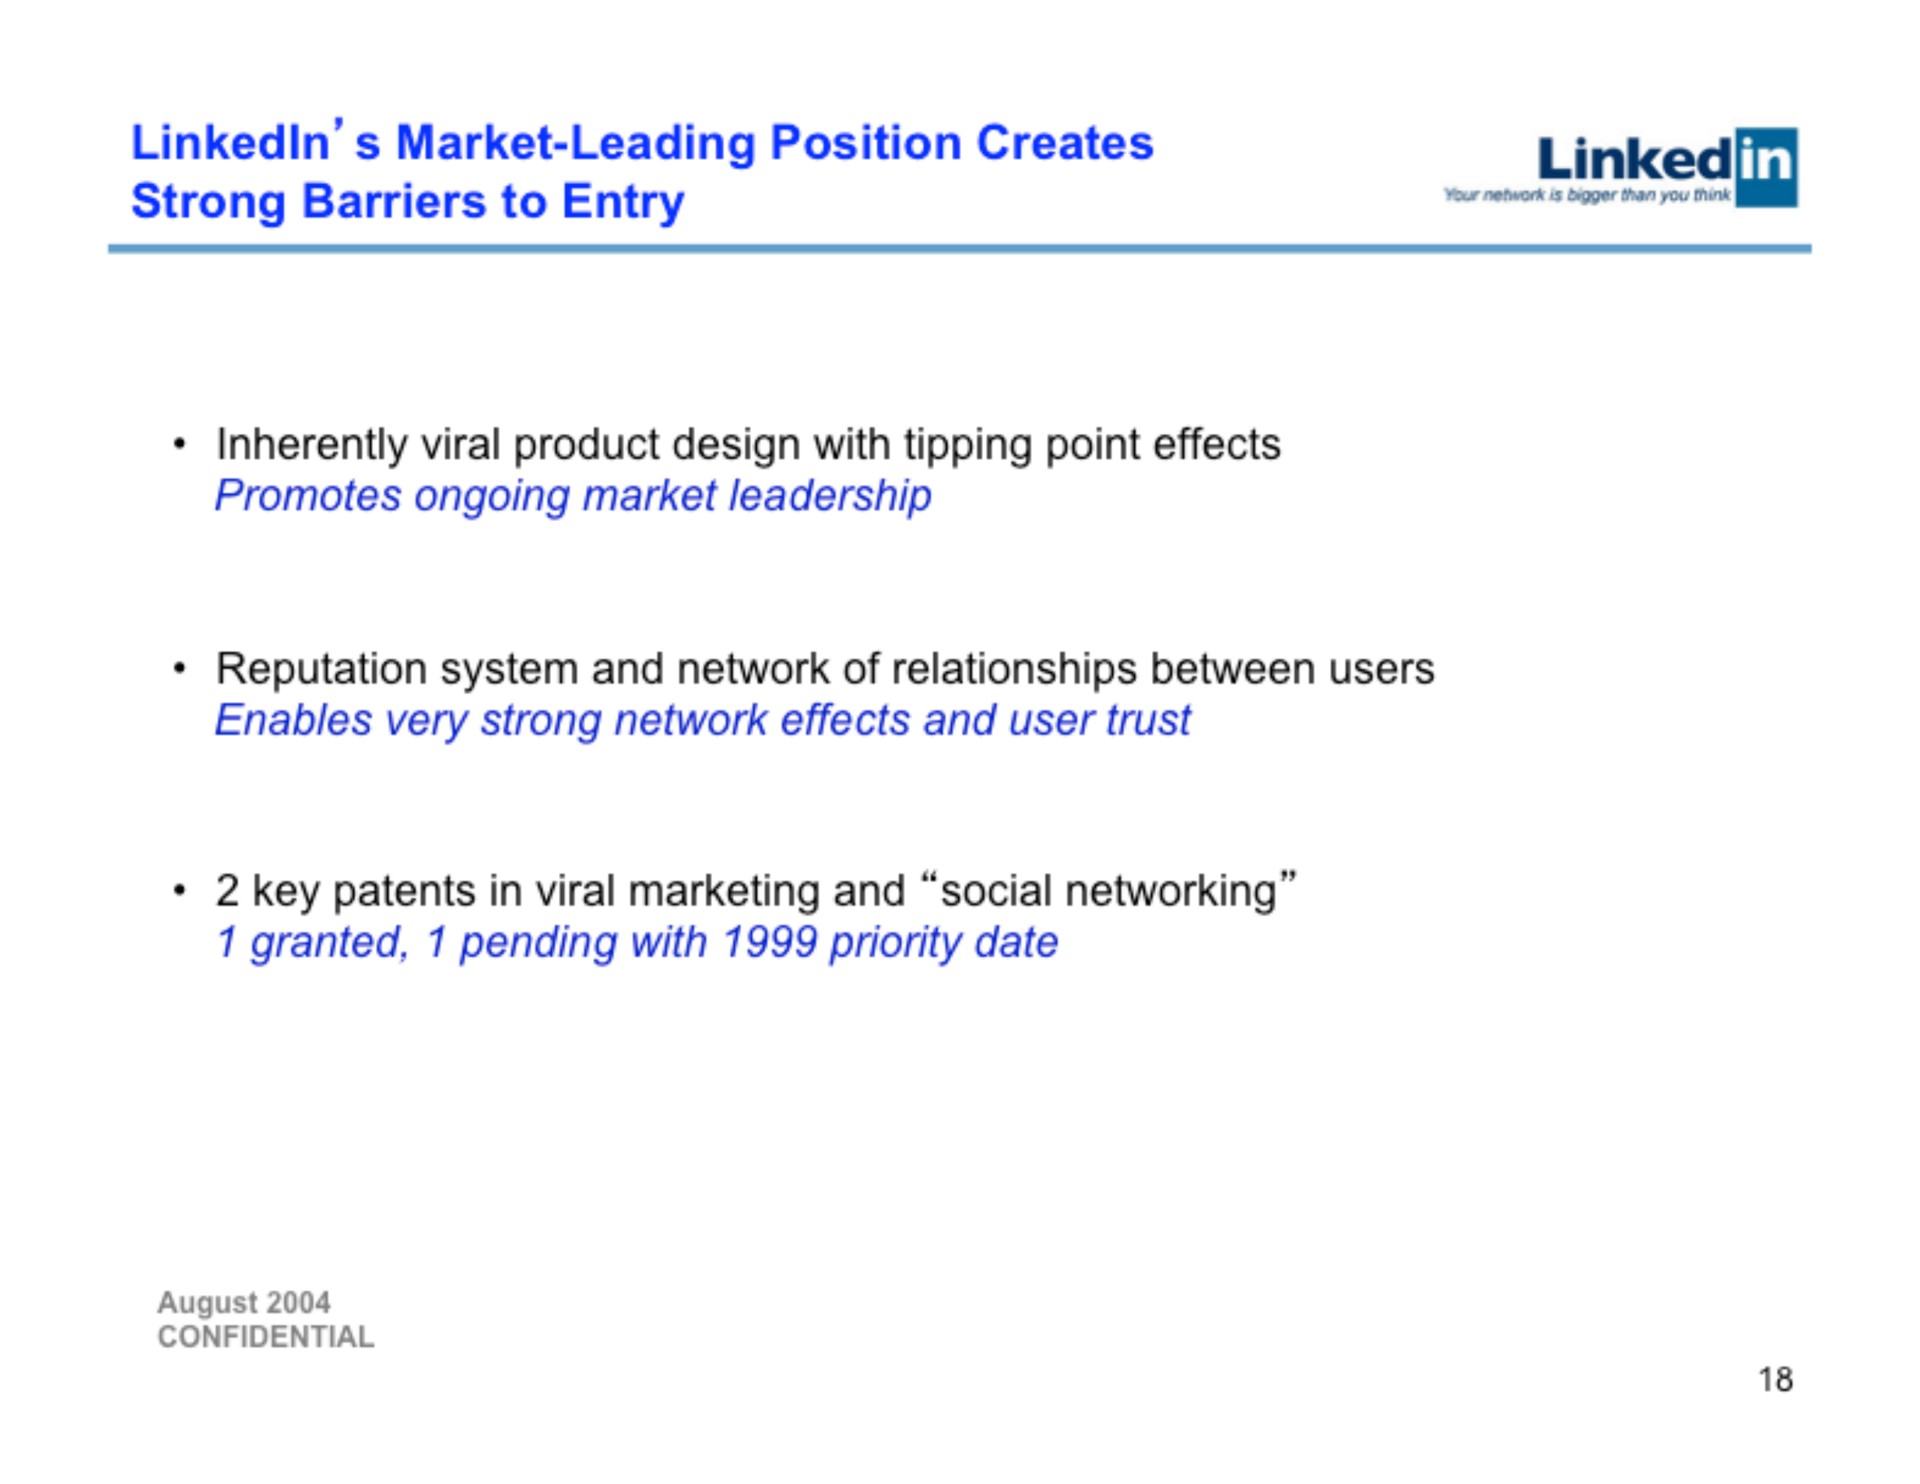 market leading position creates strong barriers to entry linked your network age than you inherently viral product design with tipping point effects promotes ongoing market leadership reputation system and network of relationships between users enables very strong network effects and user trust key patents in viral marketing and social networking granted pending with priority date | Linkedin